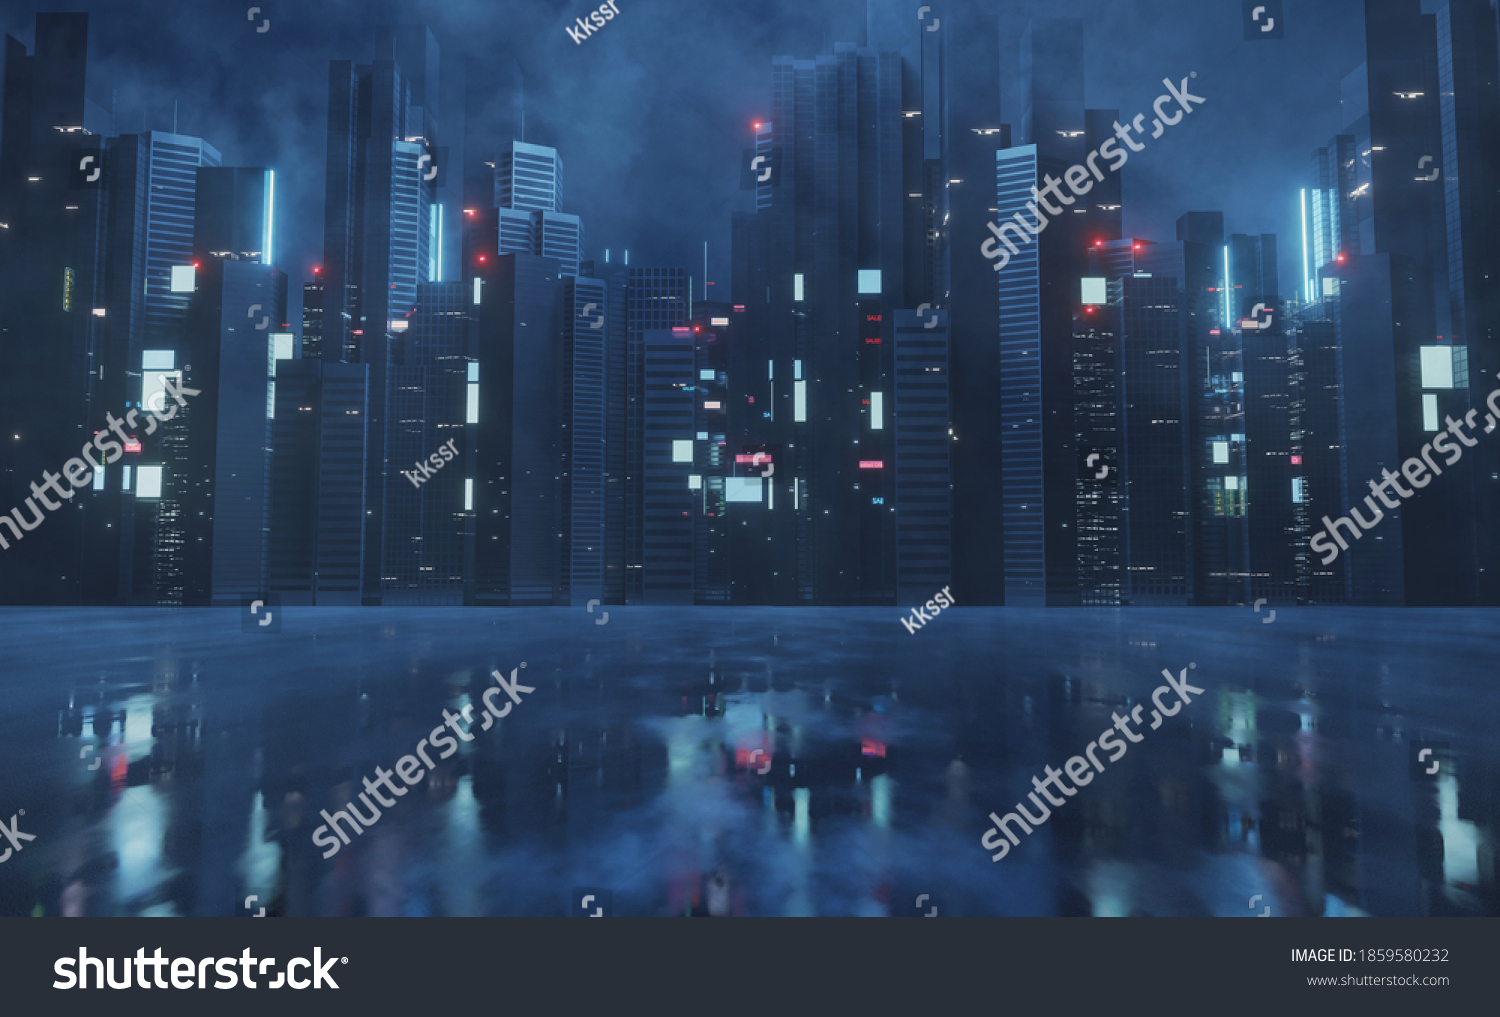 9,015 Puddle night Images, Stock Photos & Vectors | Shutterstock